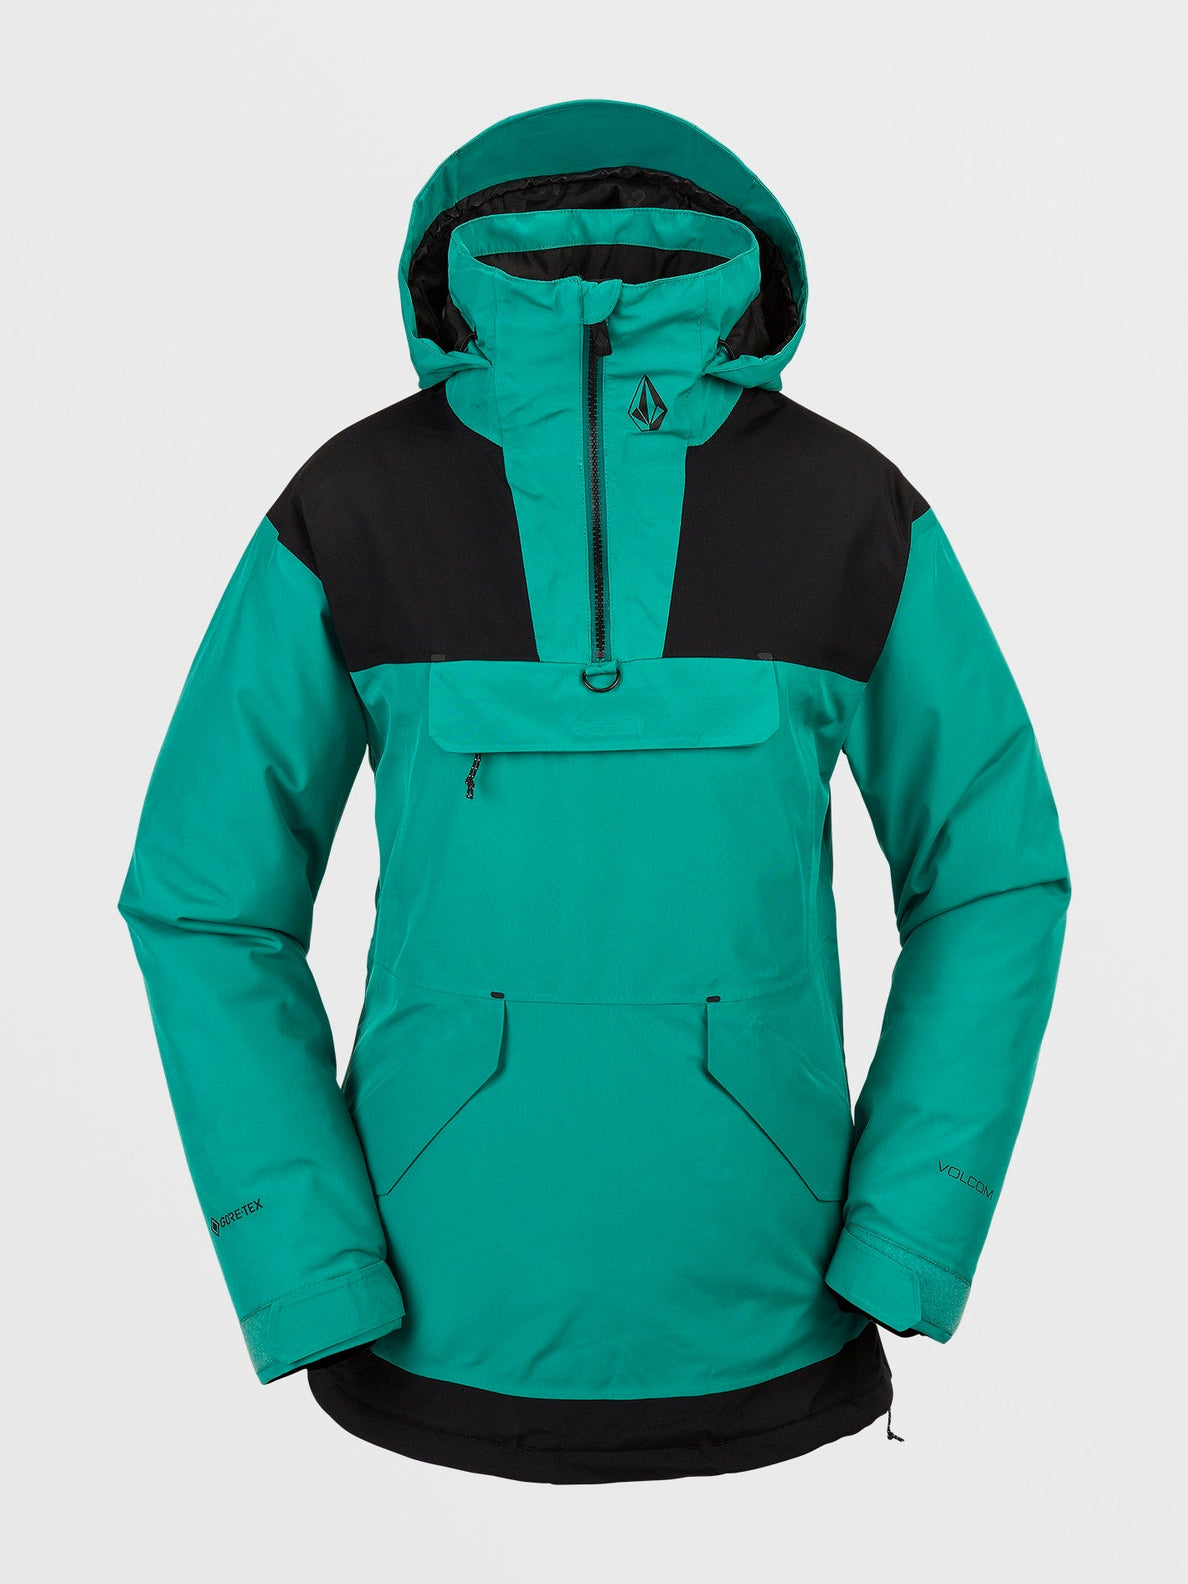 Fern Insulated Gore-Tex Jacket - VIBRANT GREEN (H0452403_VBG) [F]